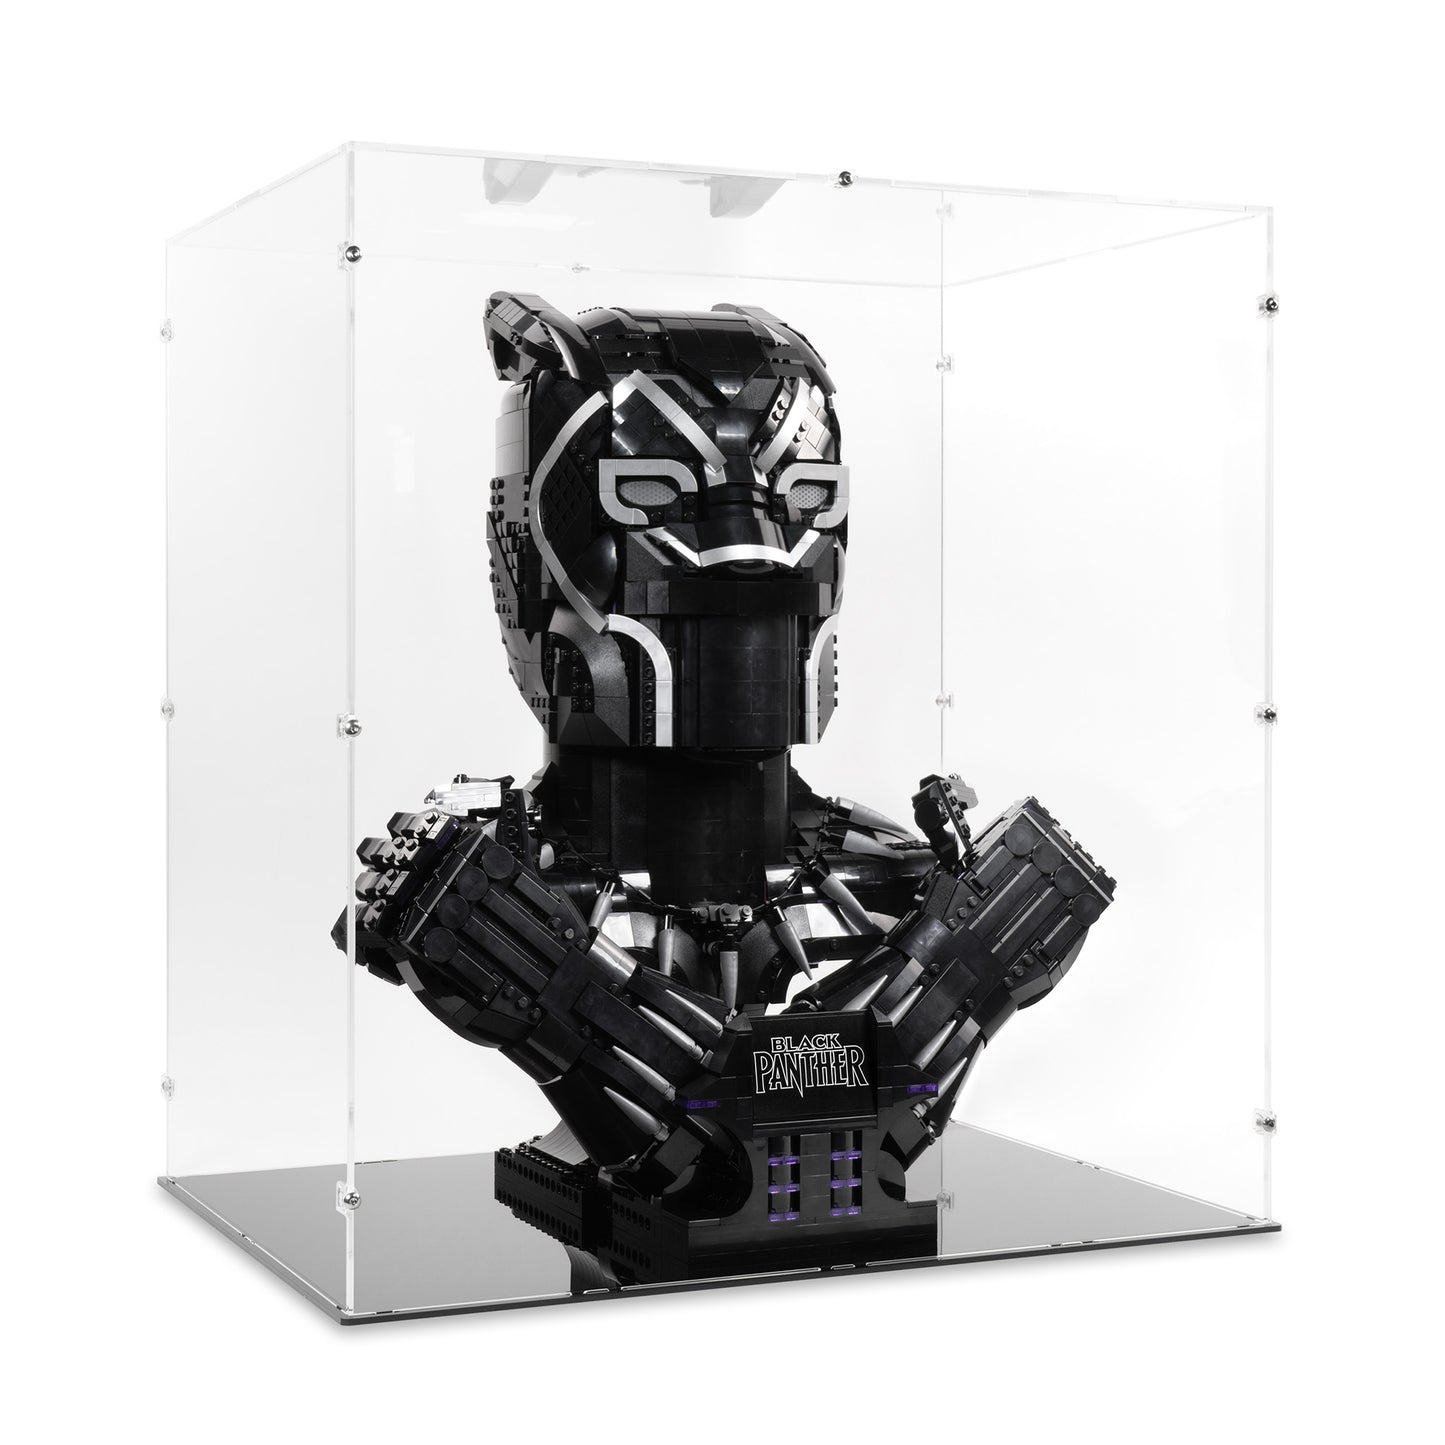 Angled view of LEGO 76215 Black Panther Display Case.